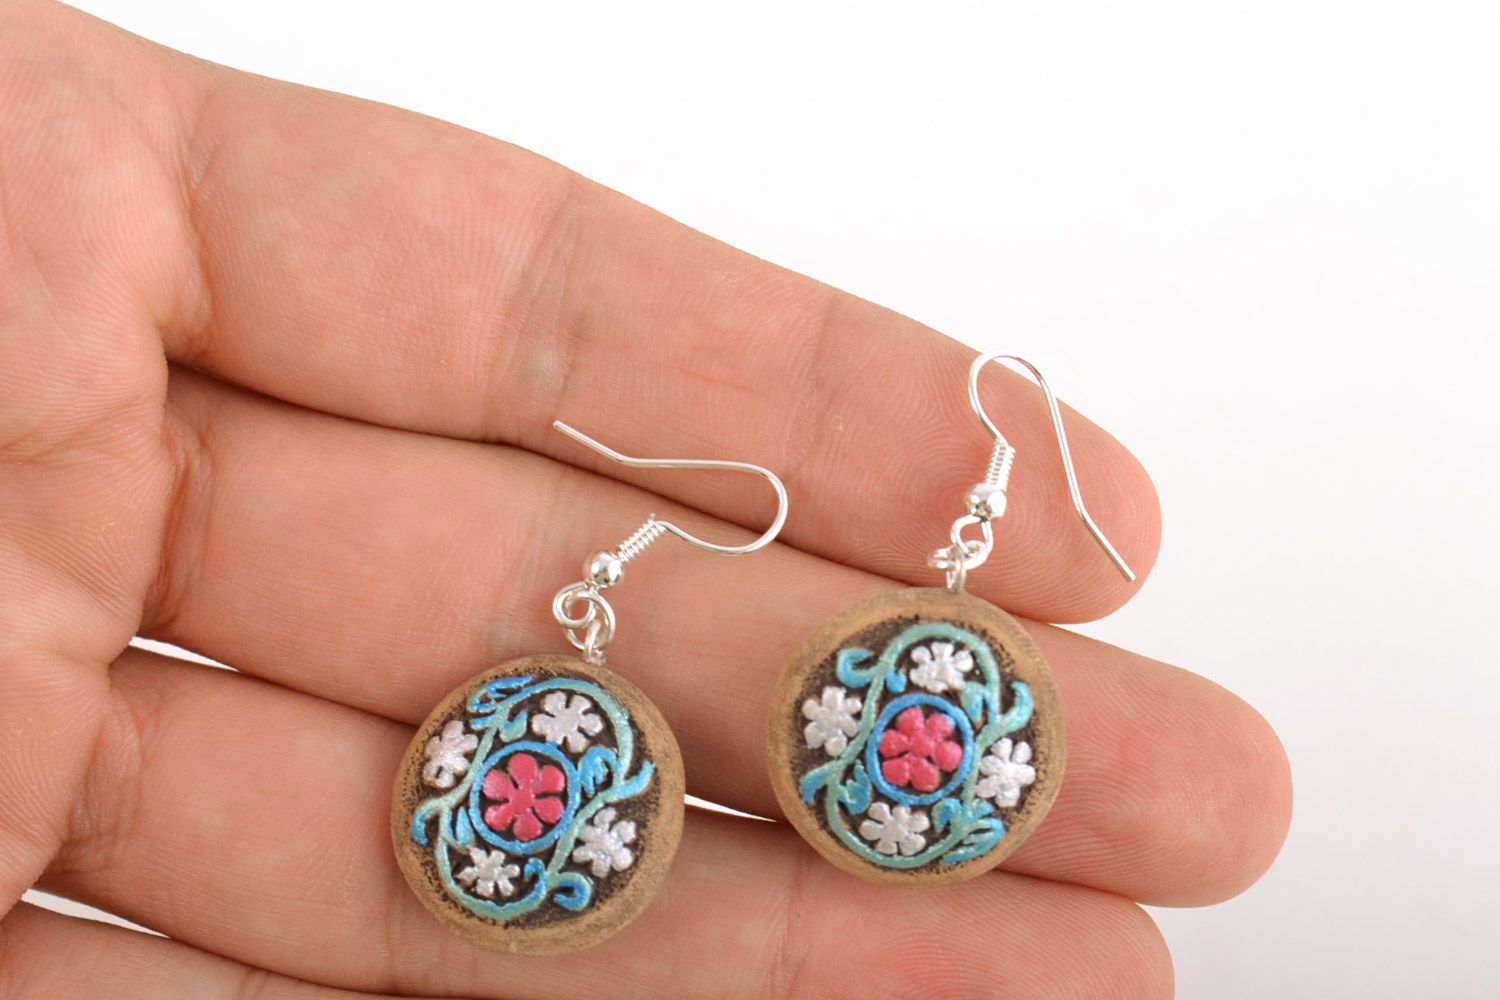 Small handmade clay round earrings painted with acrylics photo 2